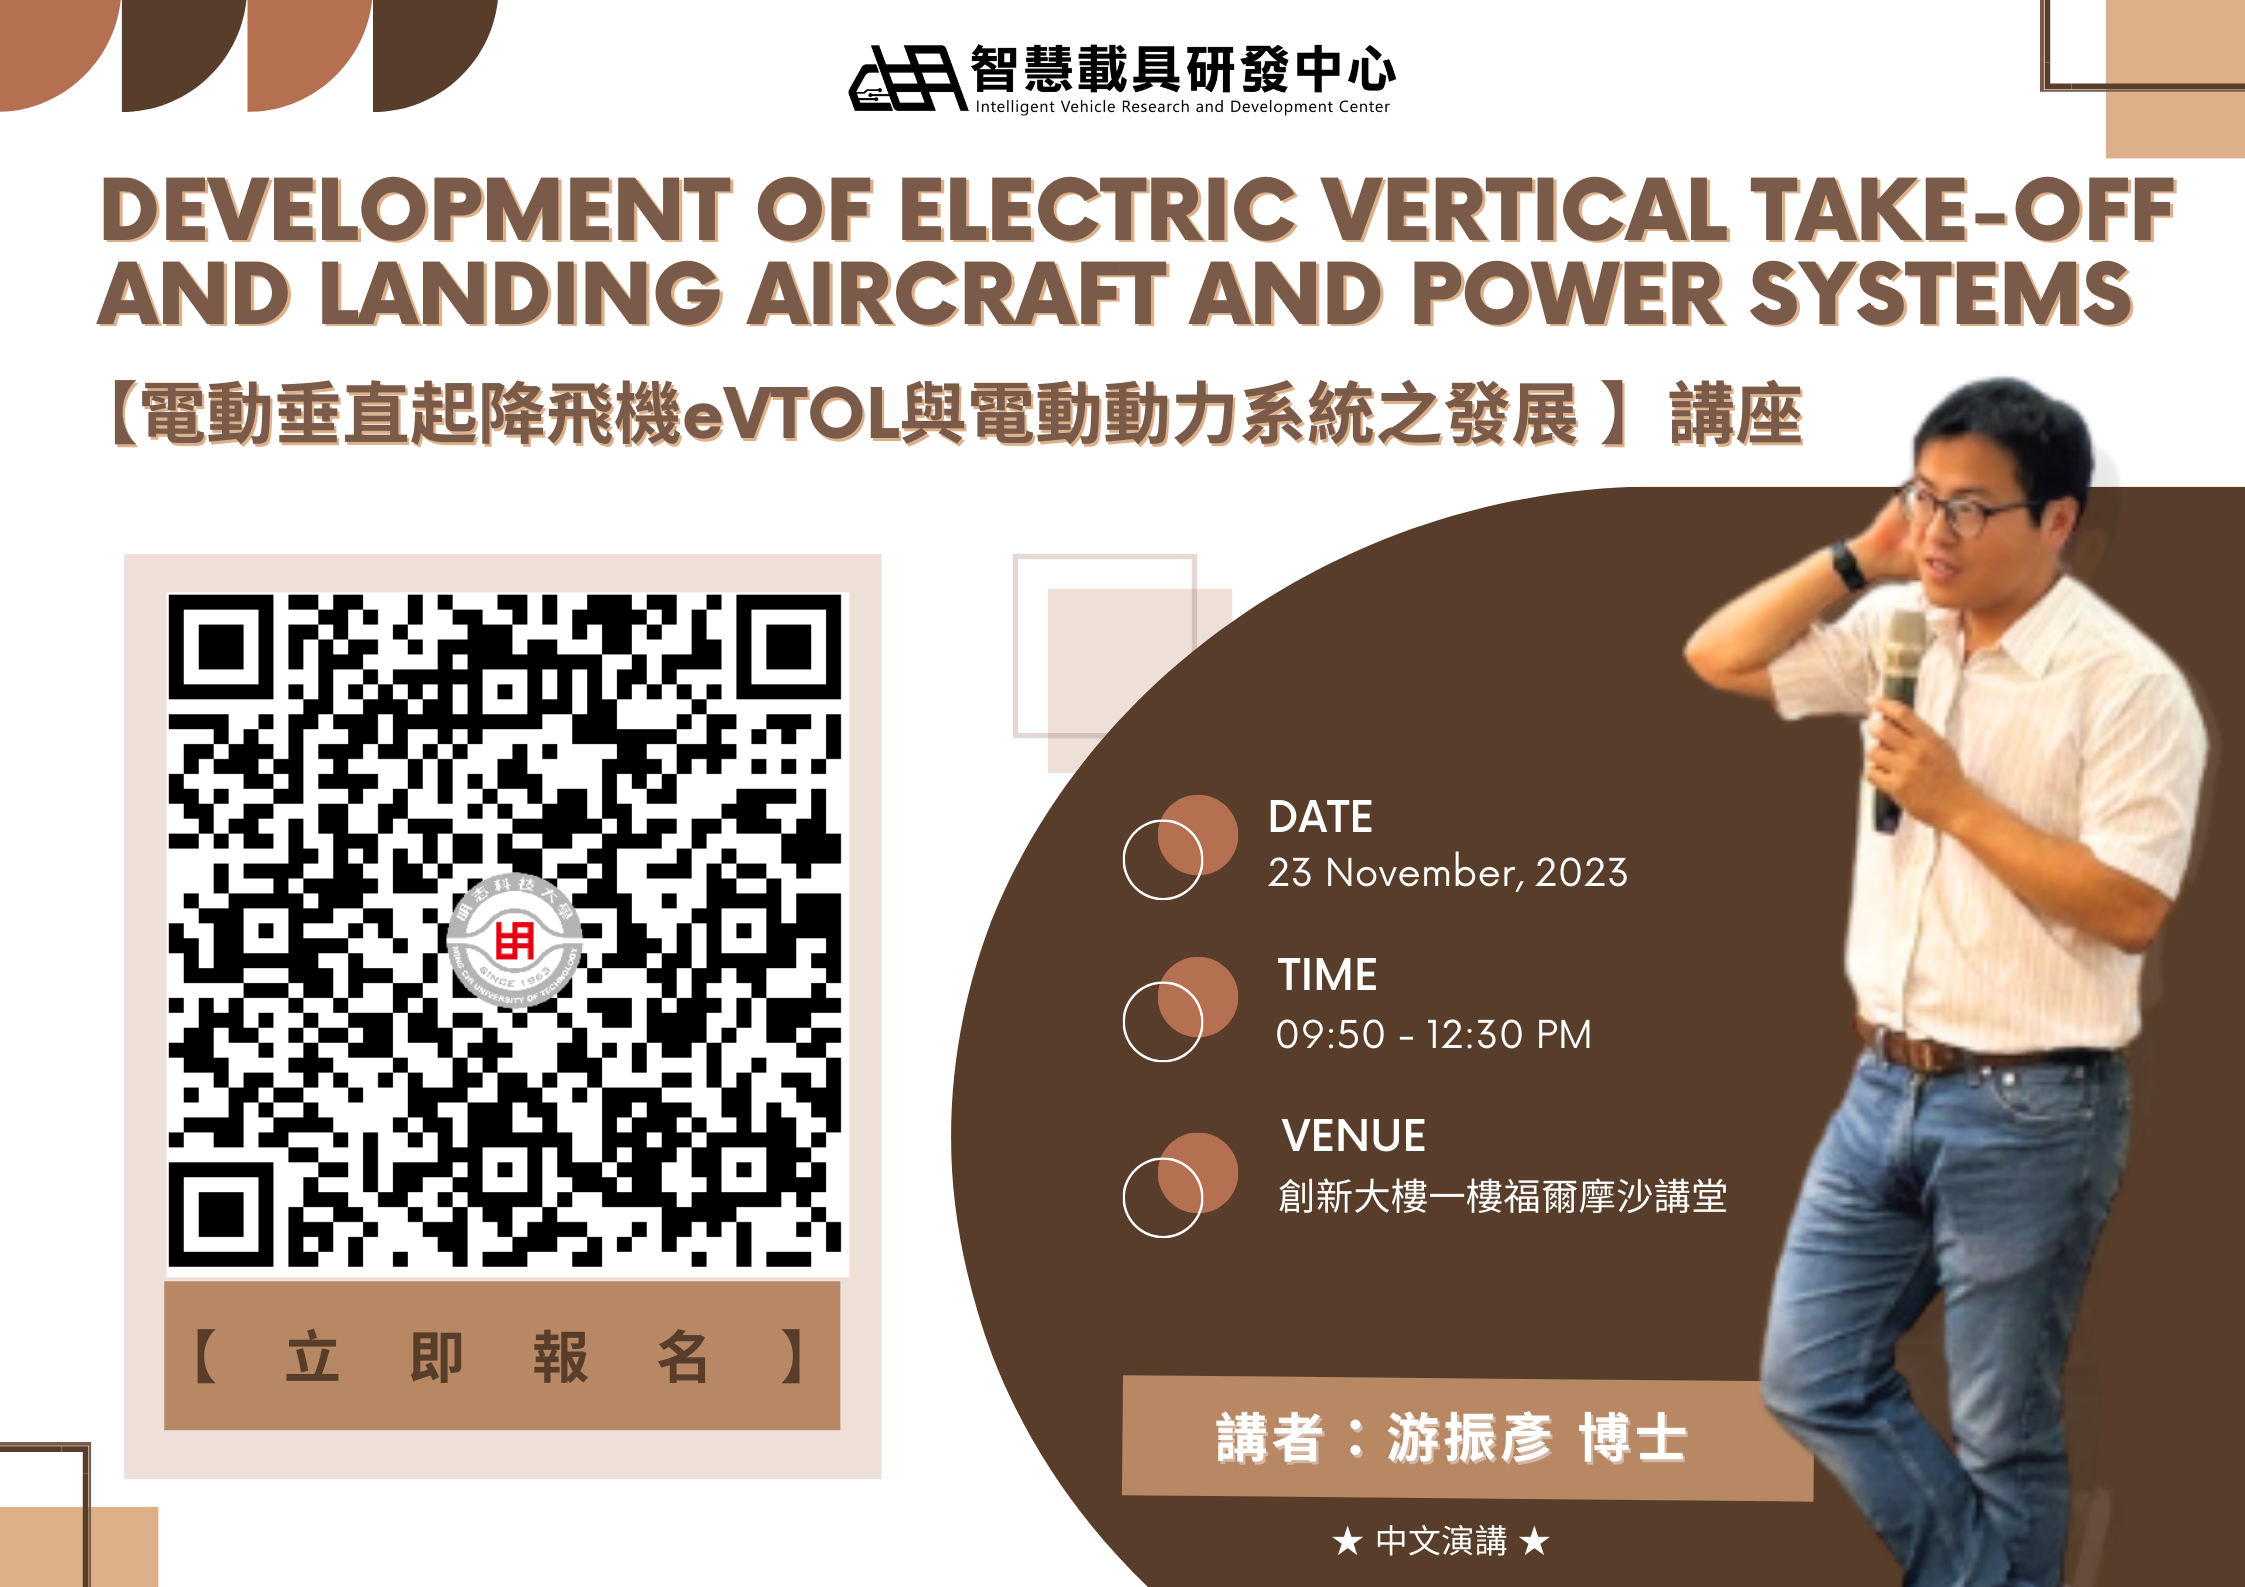  " Development of electric vertical take-off and landing aircraft and power systems "